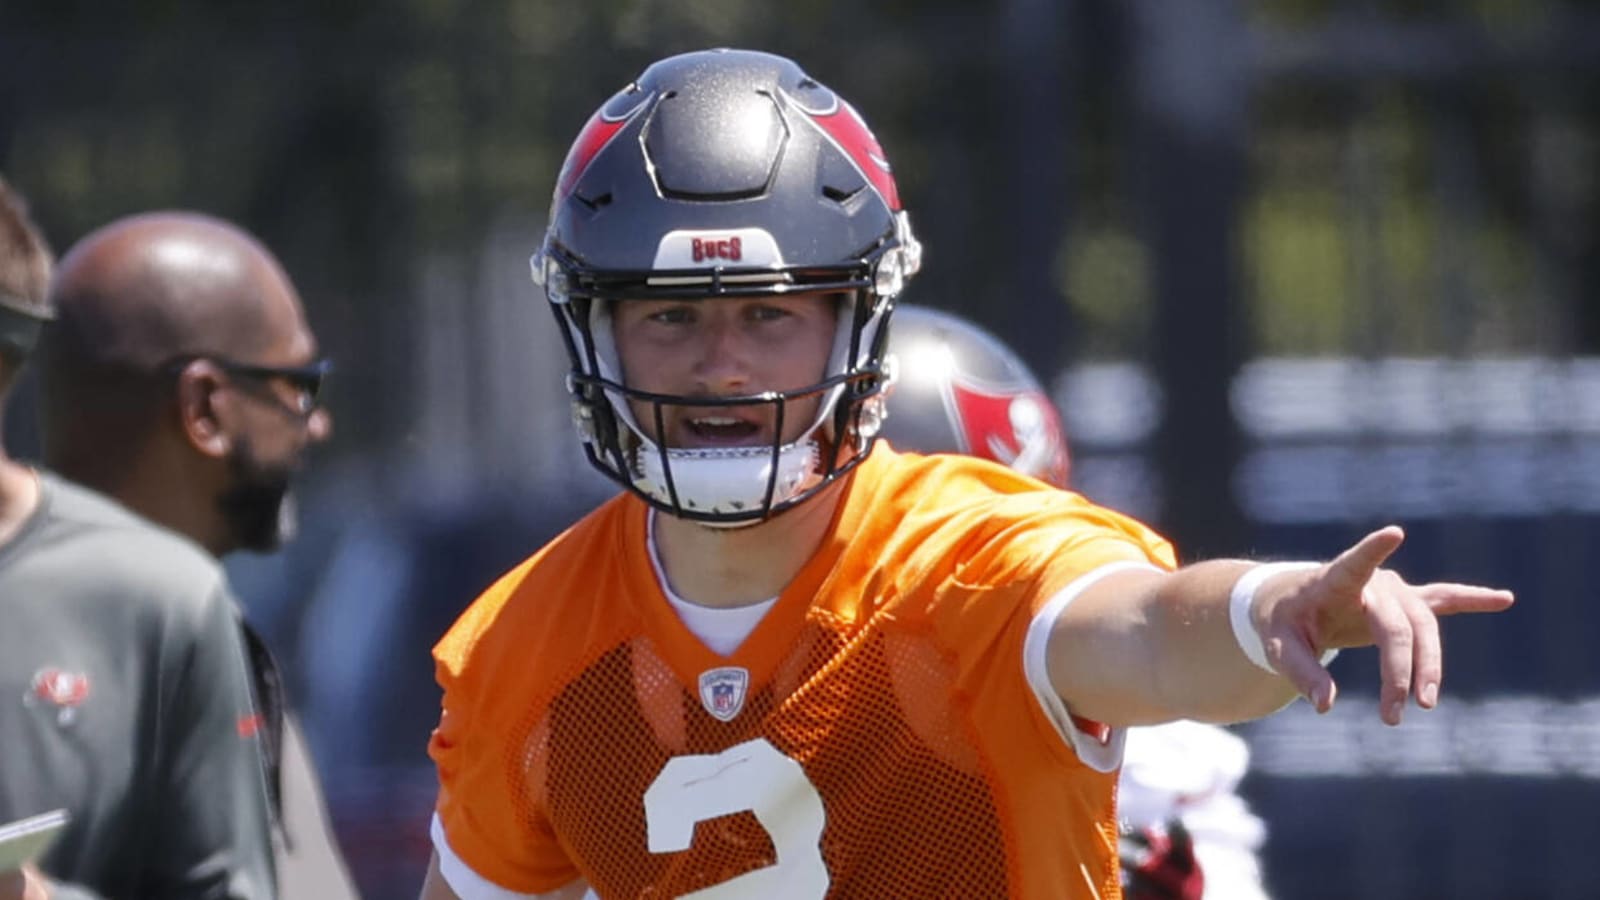 Up to the Trask: Bucs GM confident in potential new starting QB